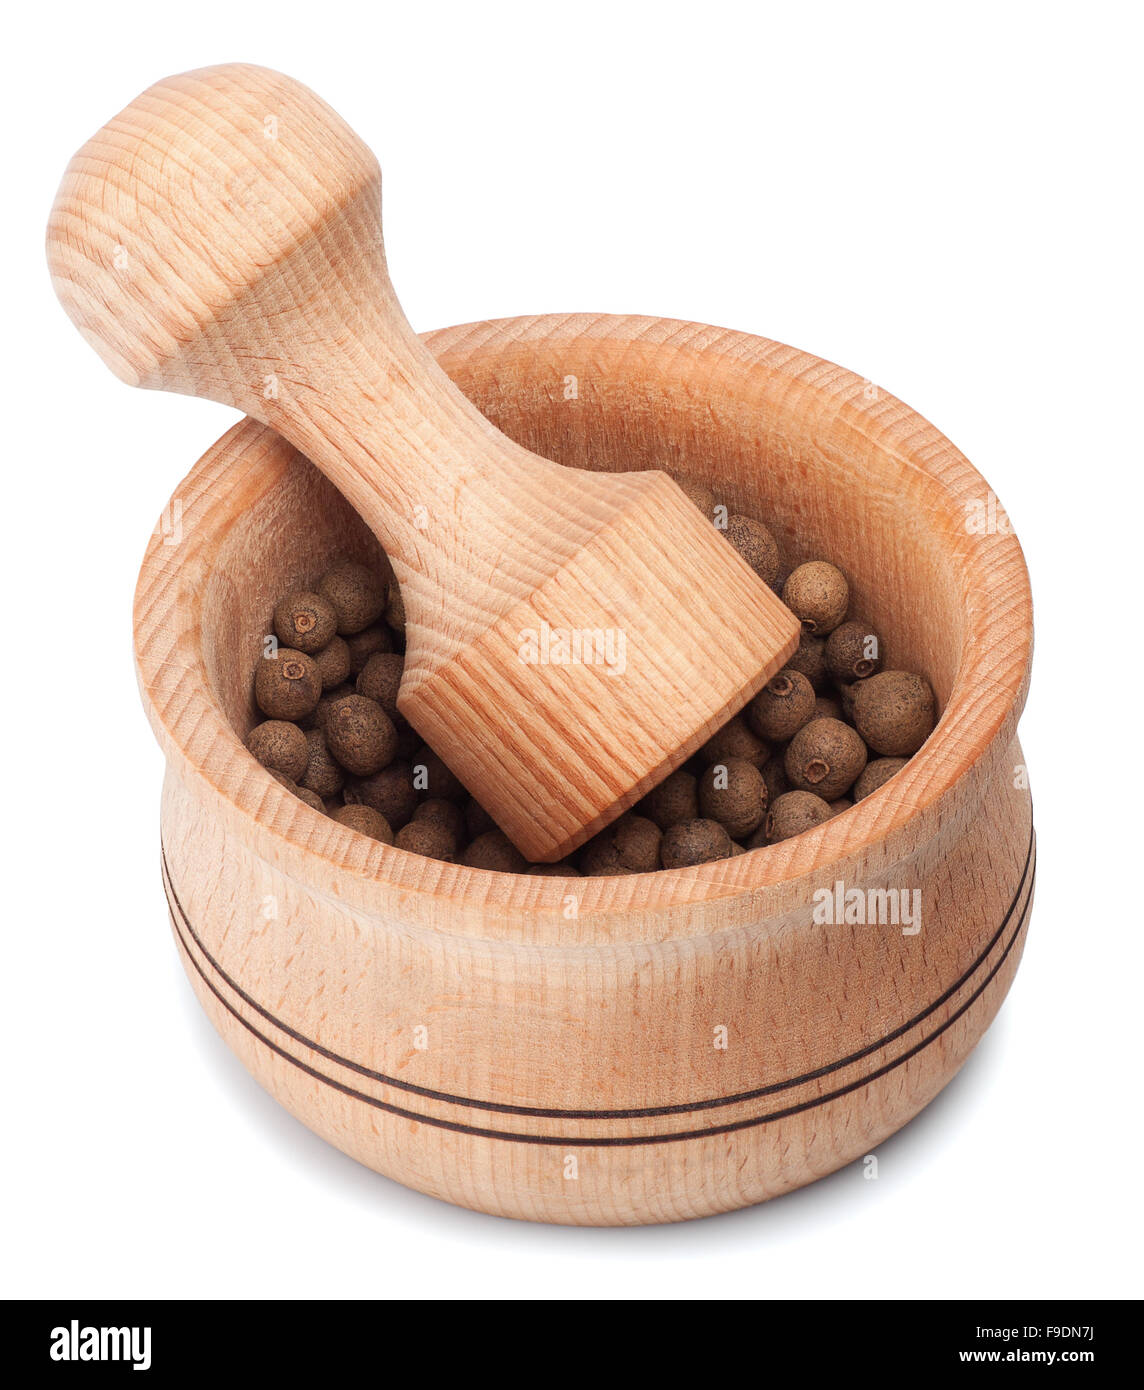 Wooden mortar and pestle with allspice isolated on white  background Stock Photo